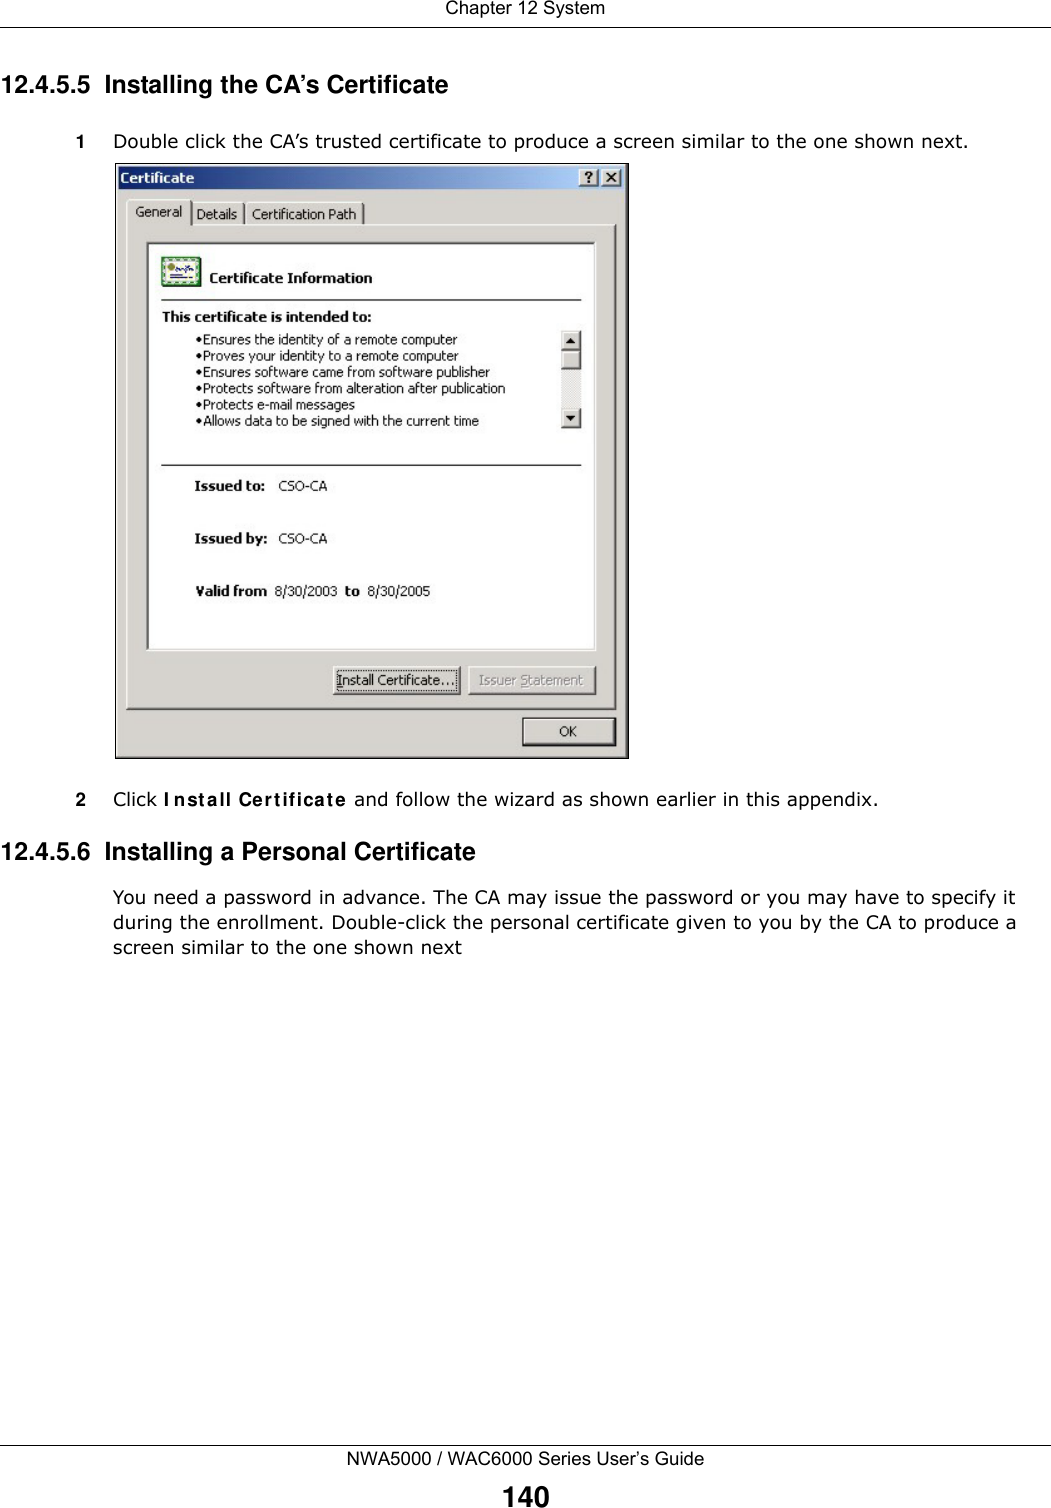 Chapter 12 SystemNWA5000 / WAC6000 Series User’s Guide14012.4.5.5  Installing the CA’s Certificate1Double click the CA’s trusted certificate to produce a screen similar to the one shown next.2Click I nst all Cert ificat e and follow the wizard as shown earlier in this appendix.12.4.5.6  Installing a Personal CertificateYou need a password in advance. The CA may issue the password or you may have to specify it during the enrollment. Double-click the personal certificate given to you by the CA to produce a screen similar to the one shown next